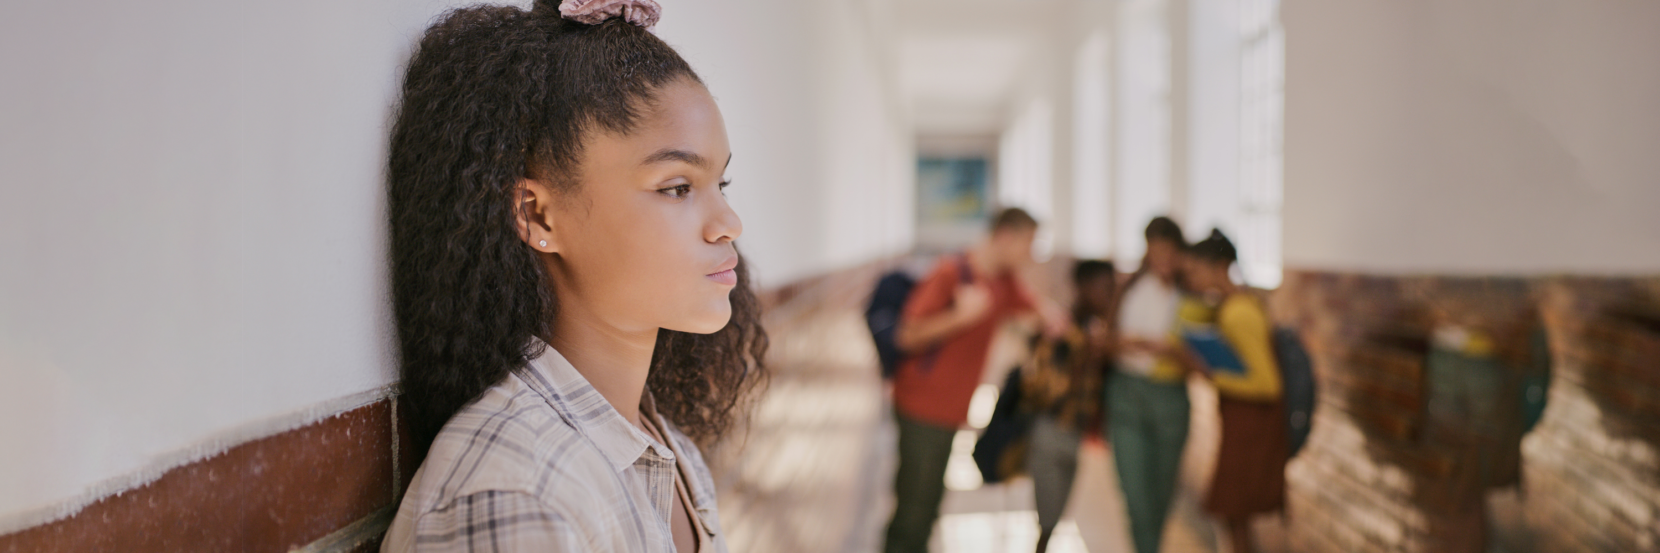 5 Bullying Prevention Strategies for Schools